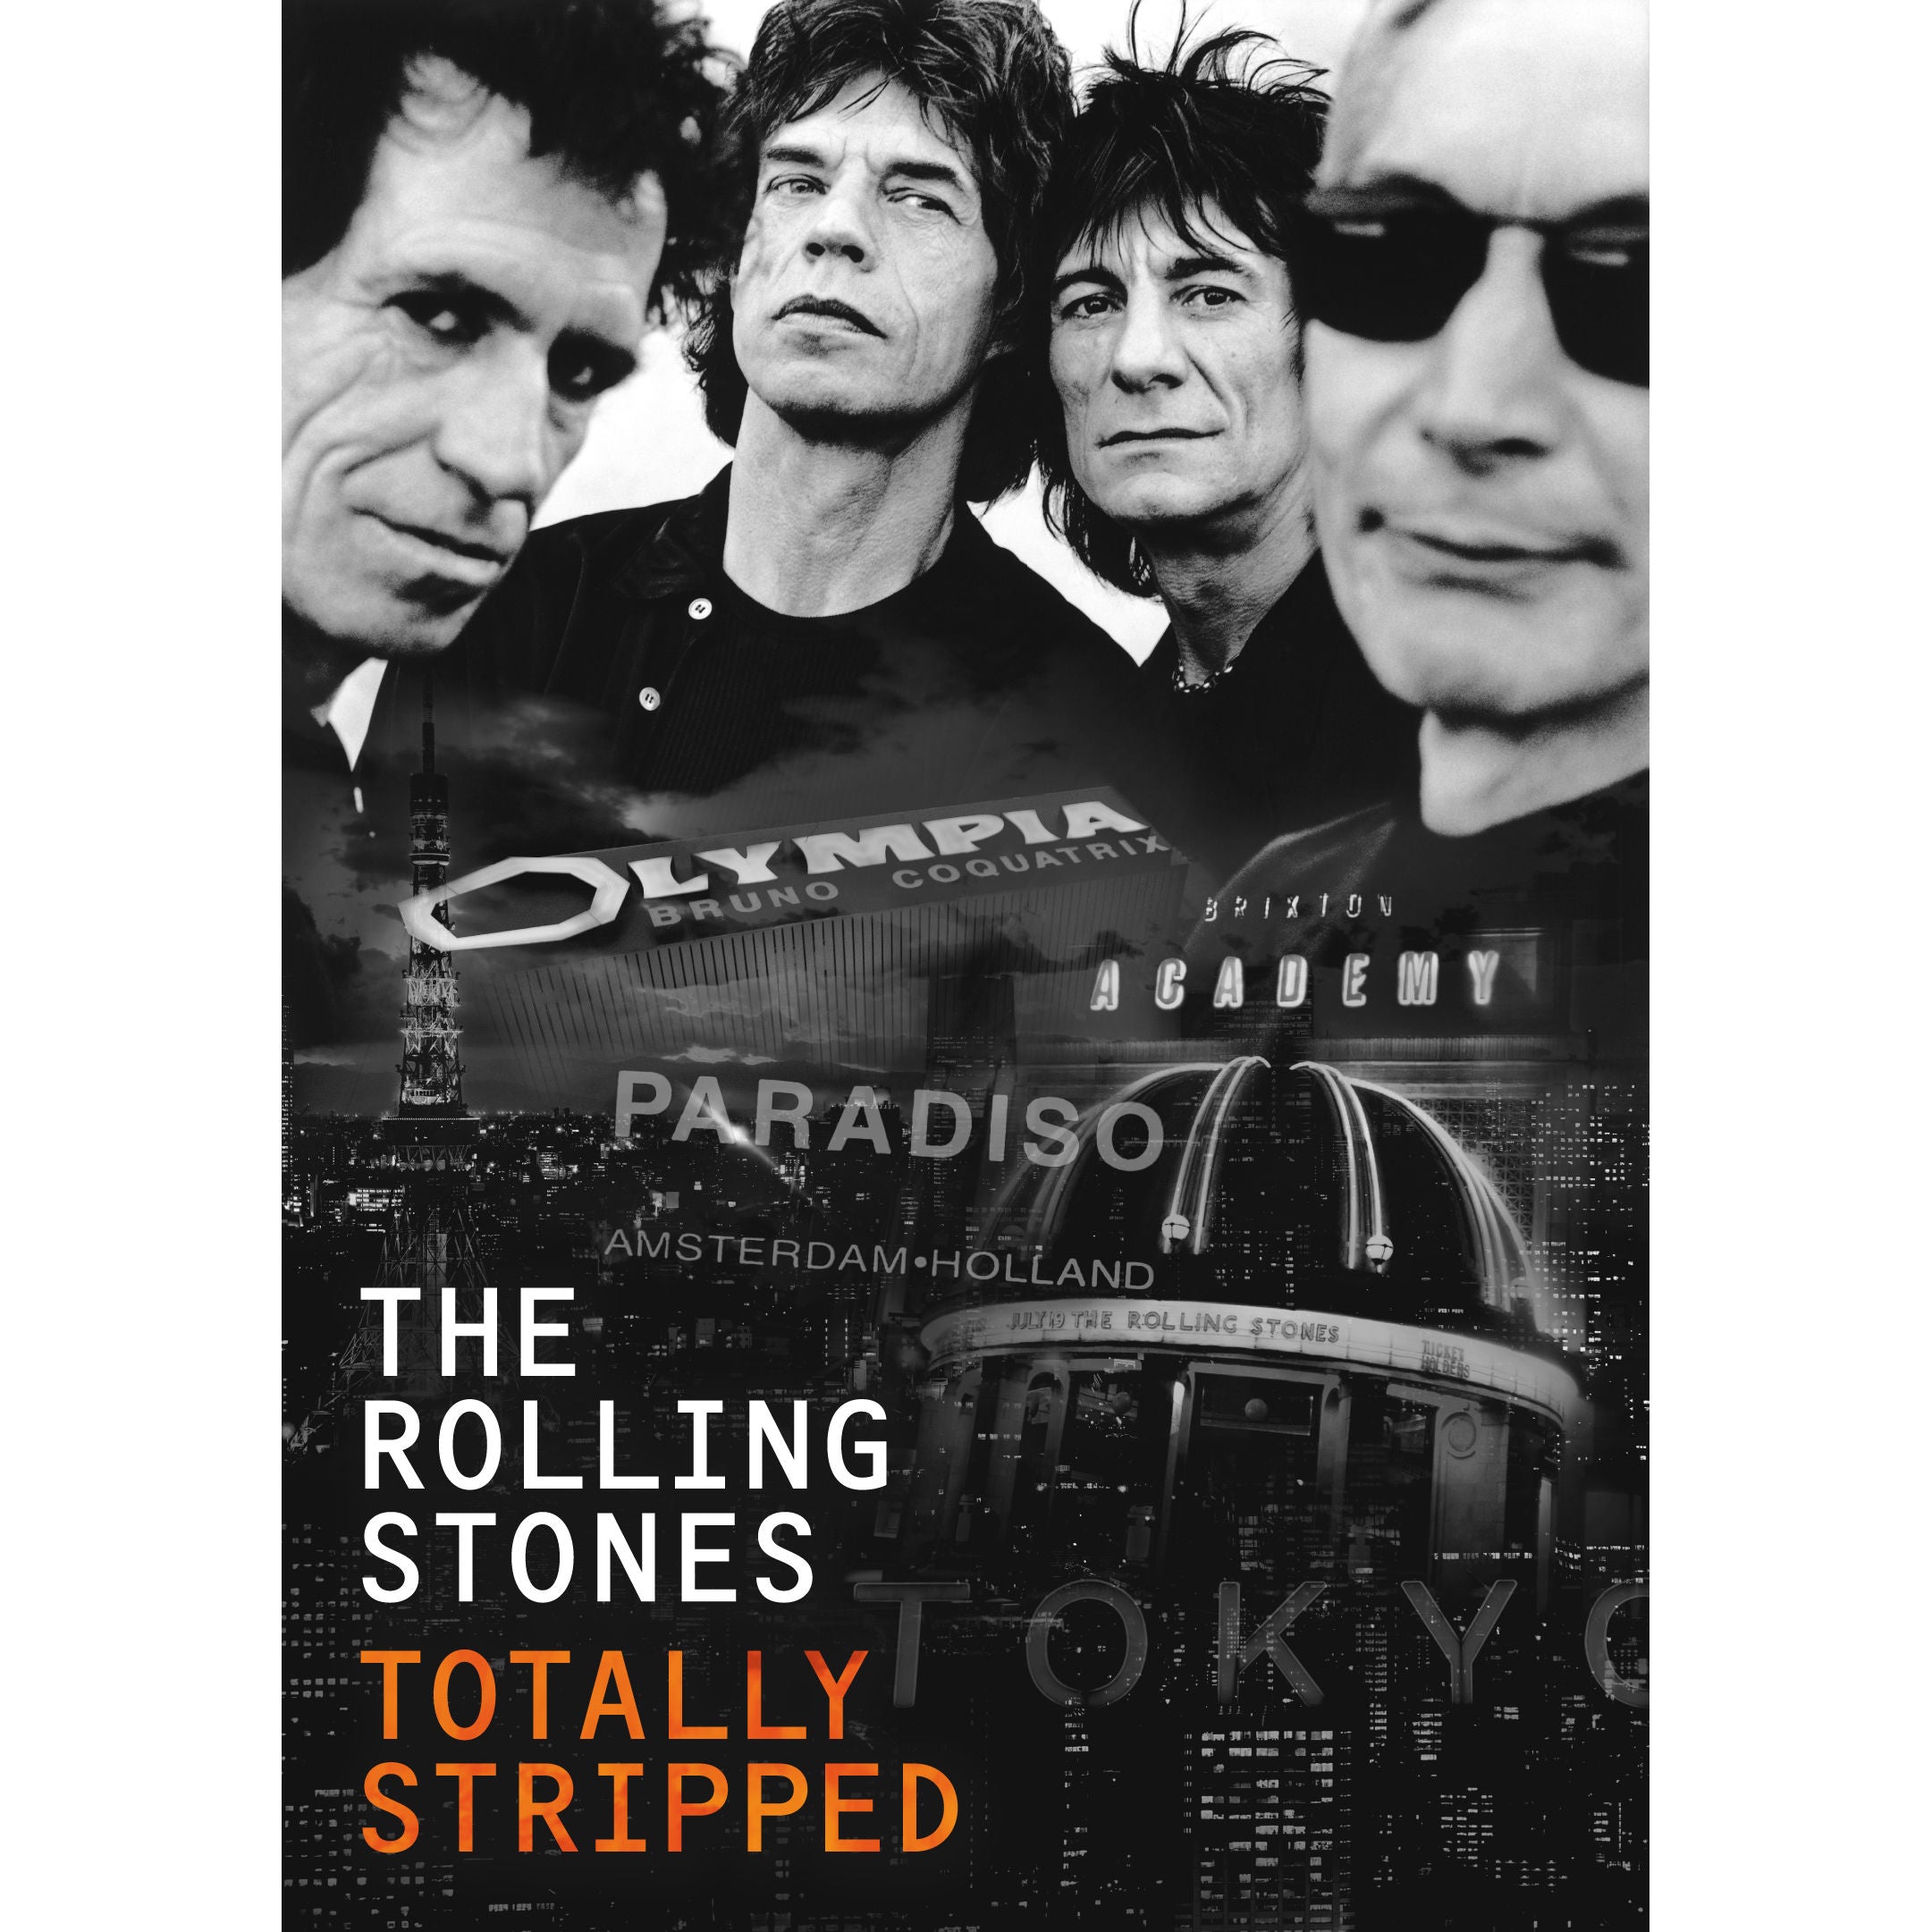 The Rolling Stones - Totally Stripped DVD